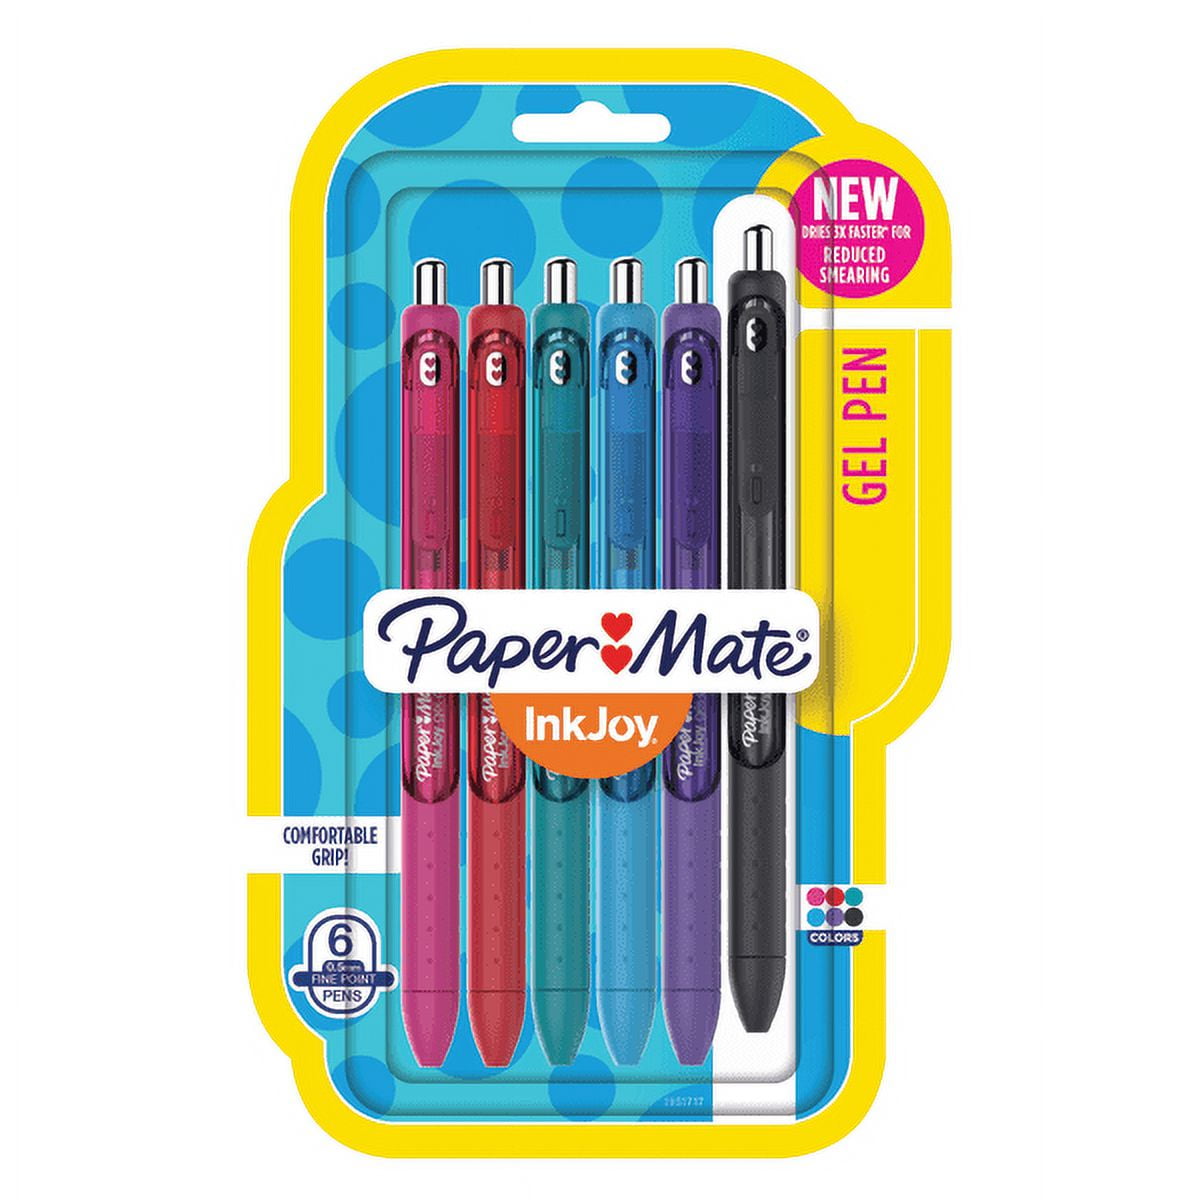 Penna NERA Paper Mate Inkjoy NEW Rollerball 0,5 Needle point - Punta ad ago